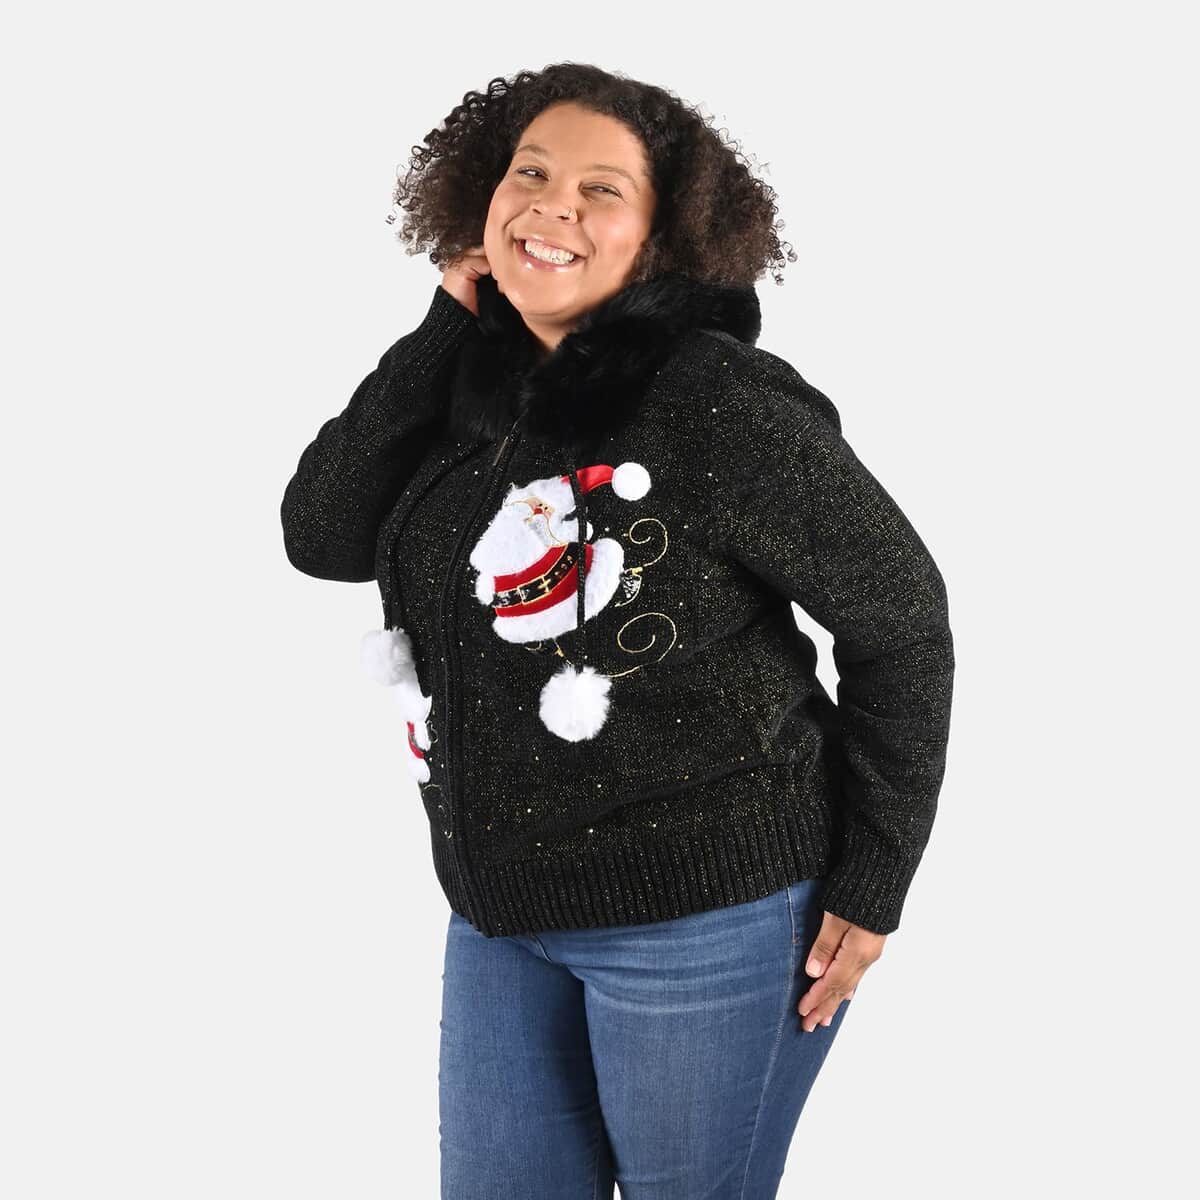 Tamsy Black Santa Christmas Sweater with Removable Fur Trim - 3X image number 3